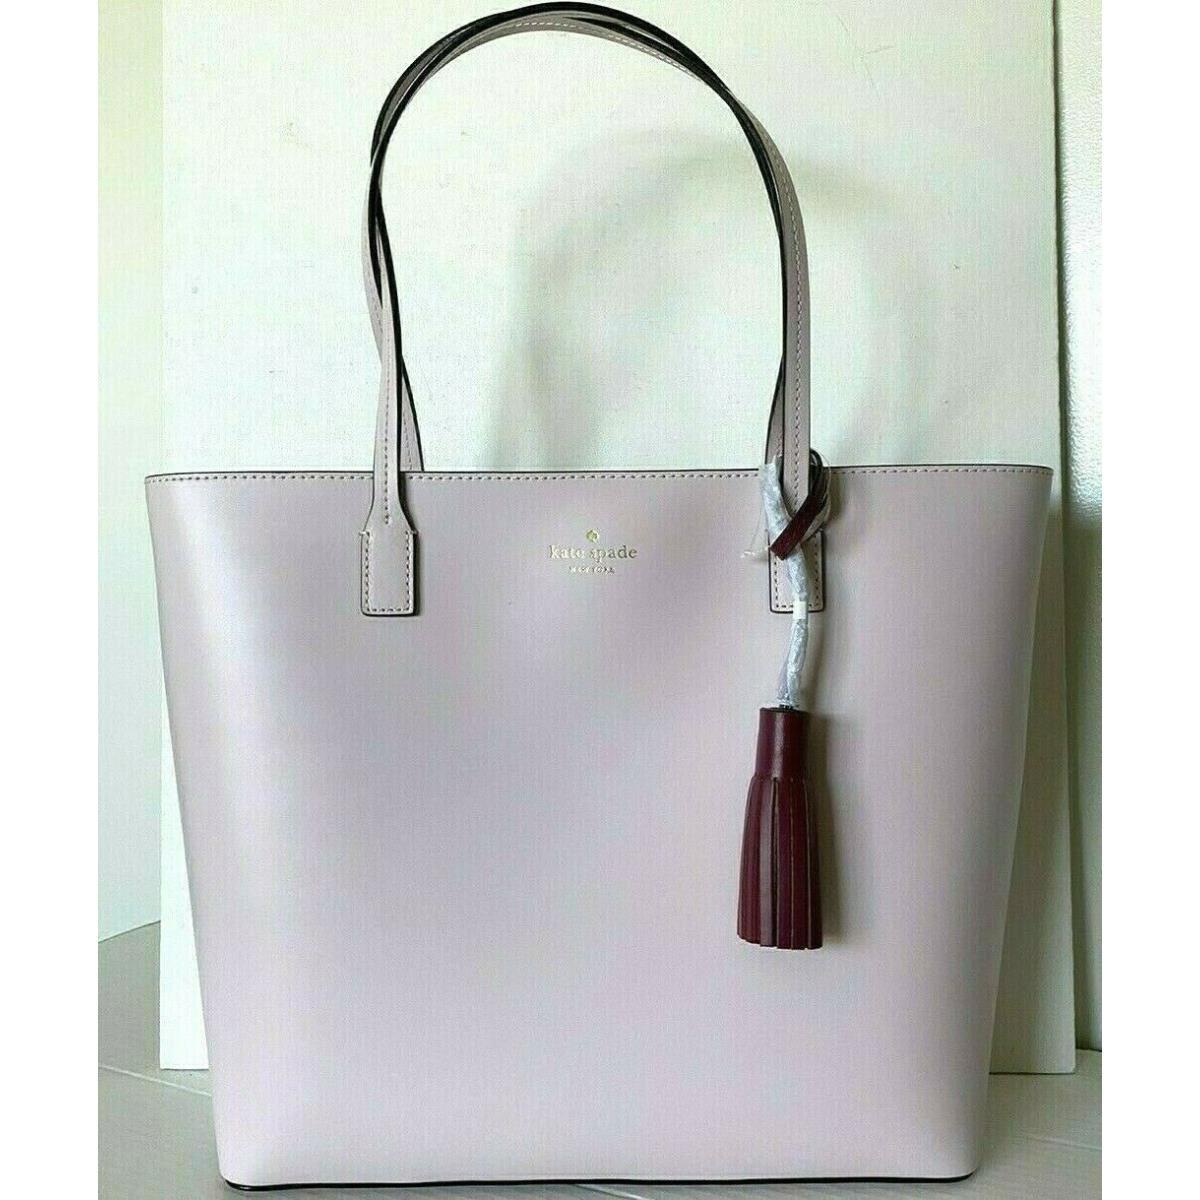 New Kate Spade Karla Wright Place Tote with Tassel Plum Dawn / Rioja / Dust Bag